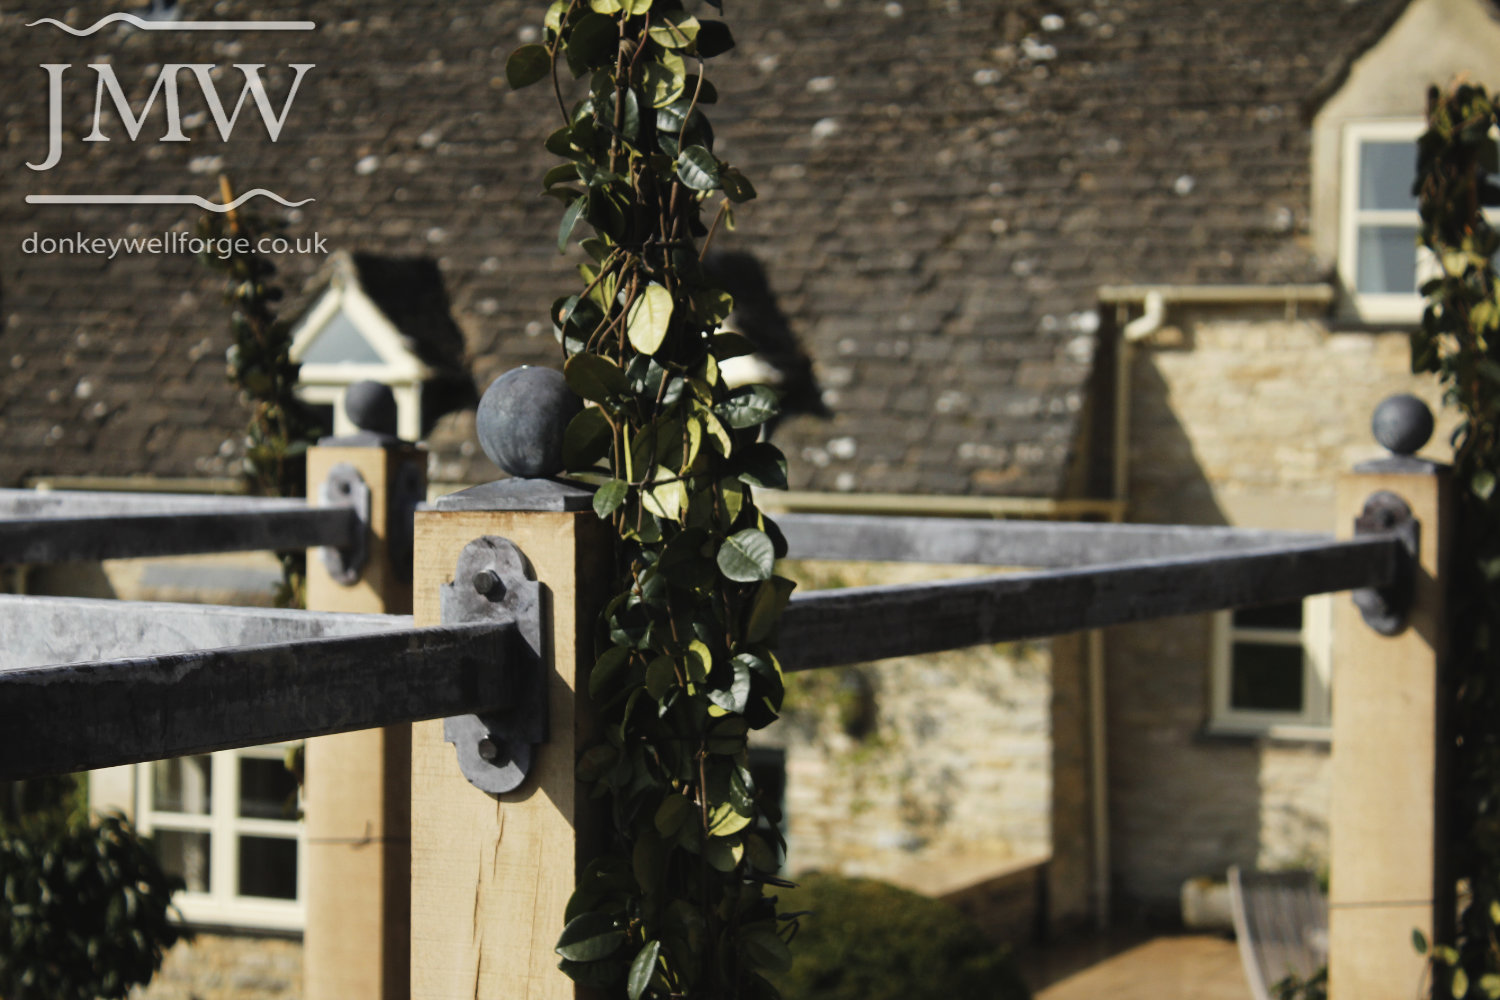 country-cottage-steel-pergola-zinc-lead-finish-metalwork-cotswolds